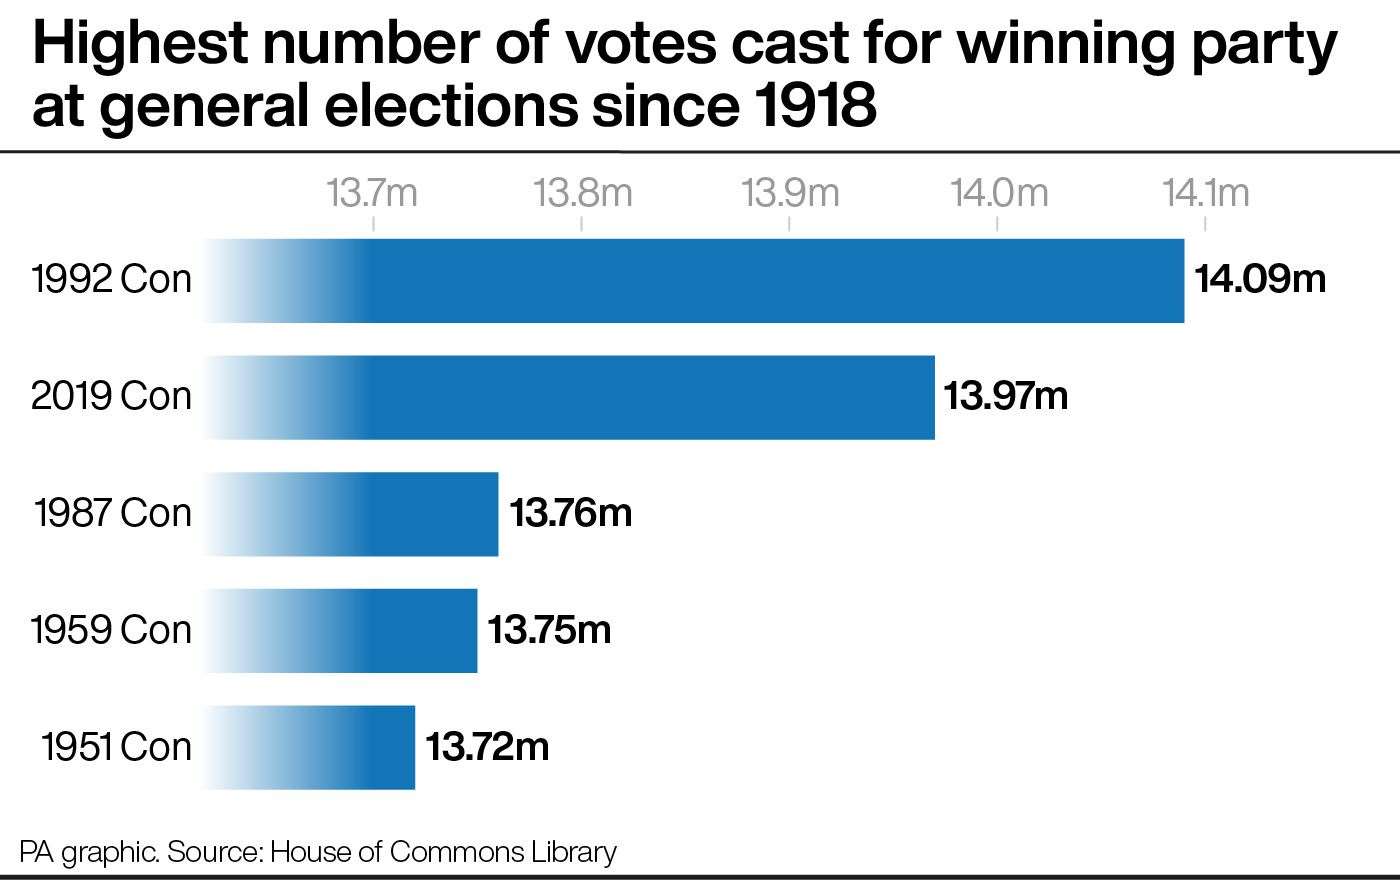 The highest number of votes cast for a winner party at general elections since 1918 (PA Graphics)